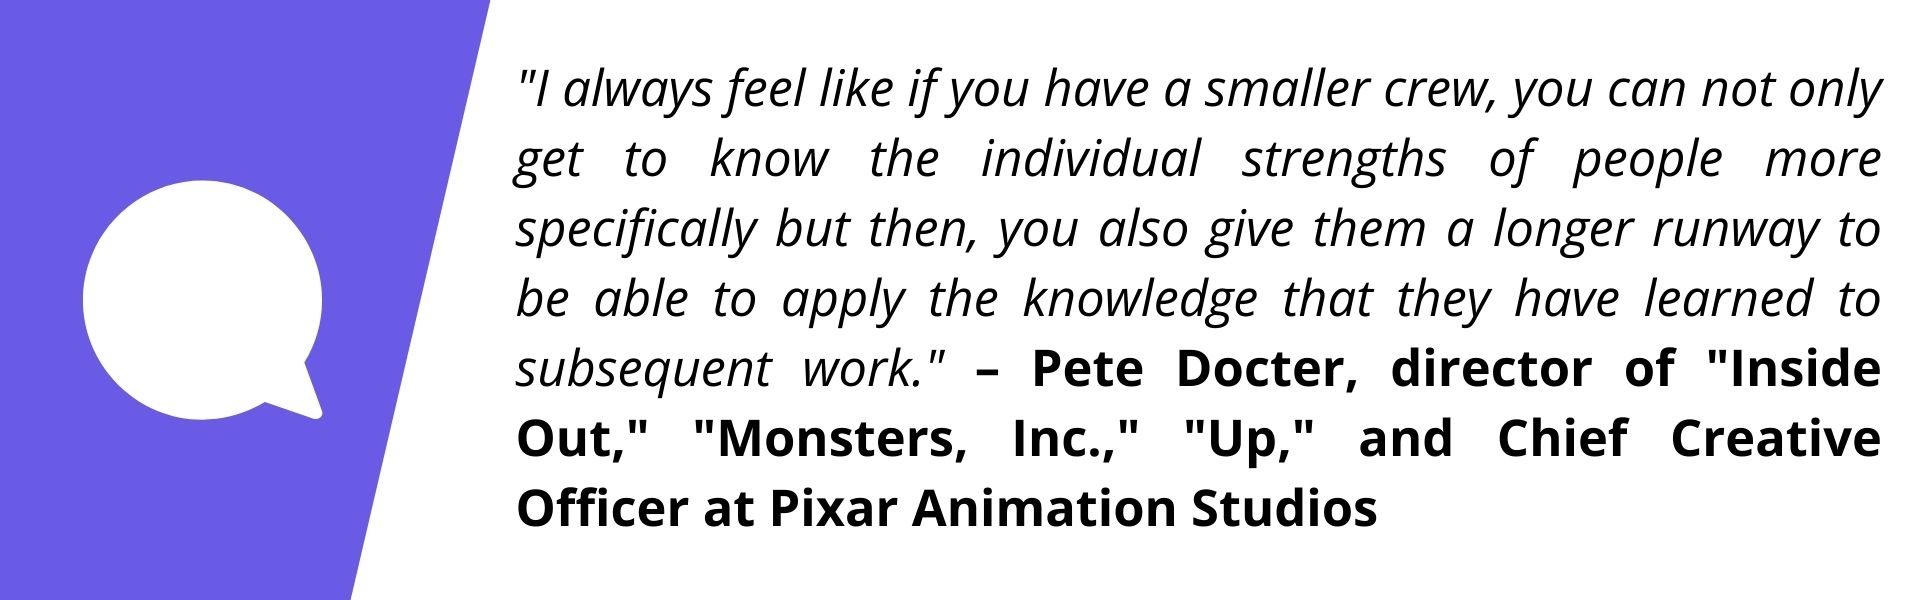 Pete Docter, Chief Creative Officer at Pixar Animation Studios